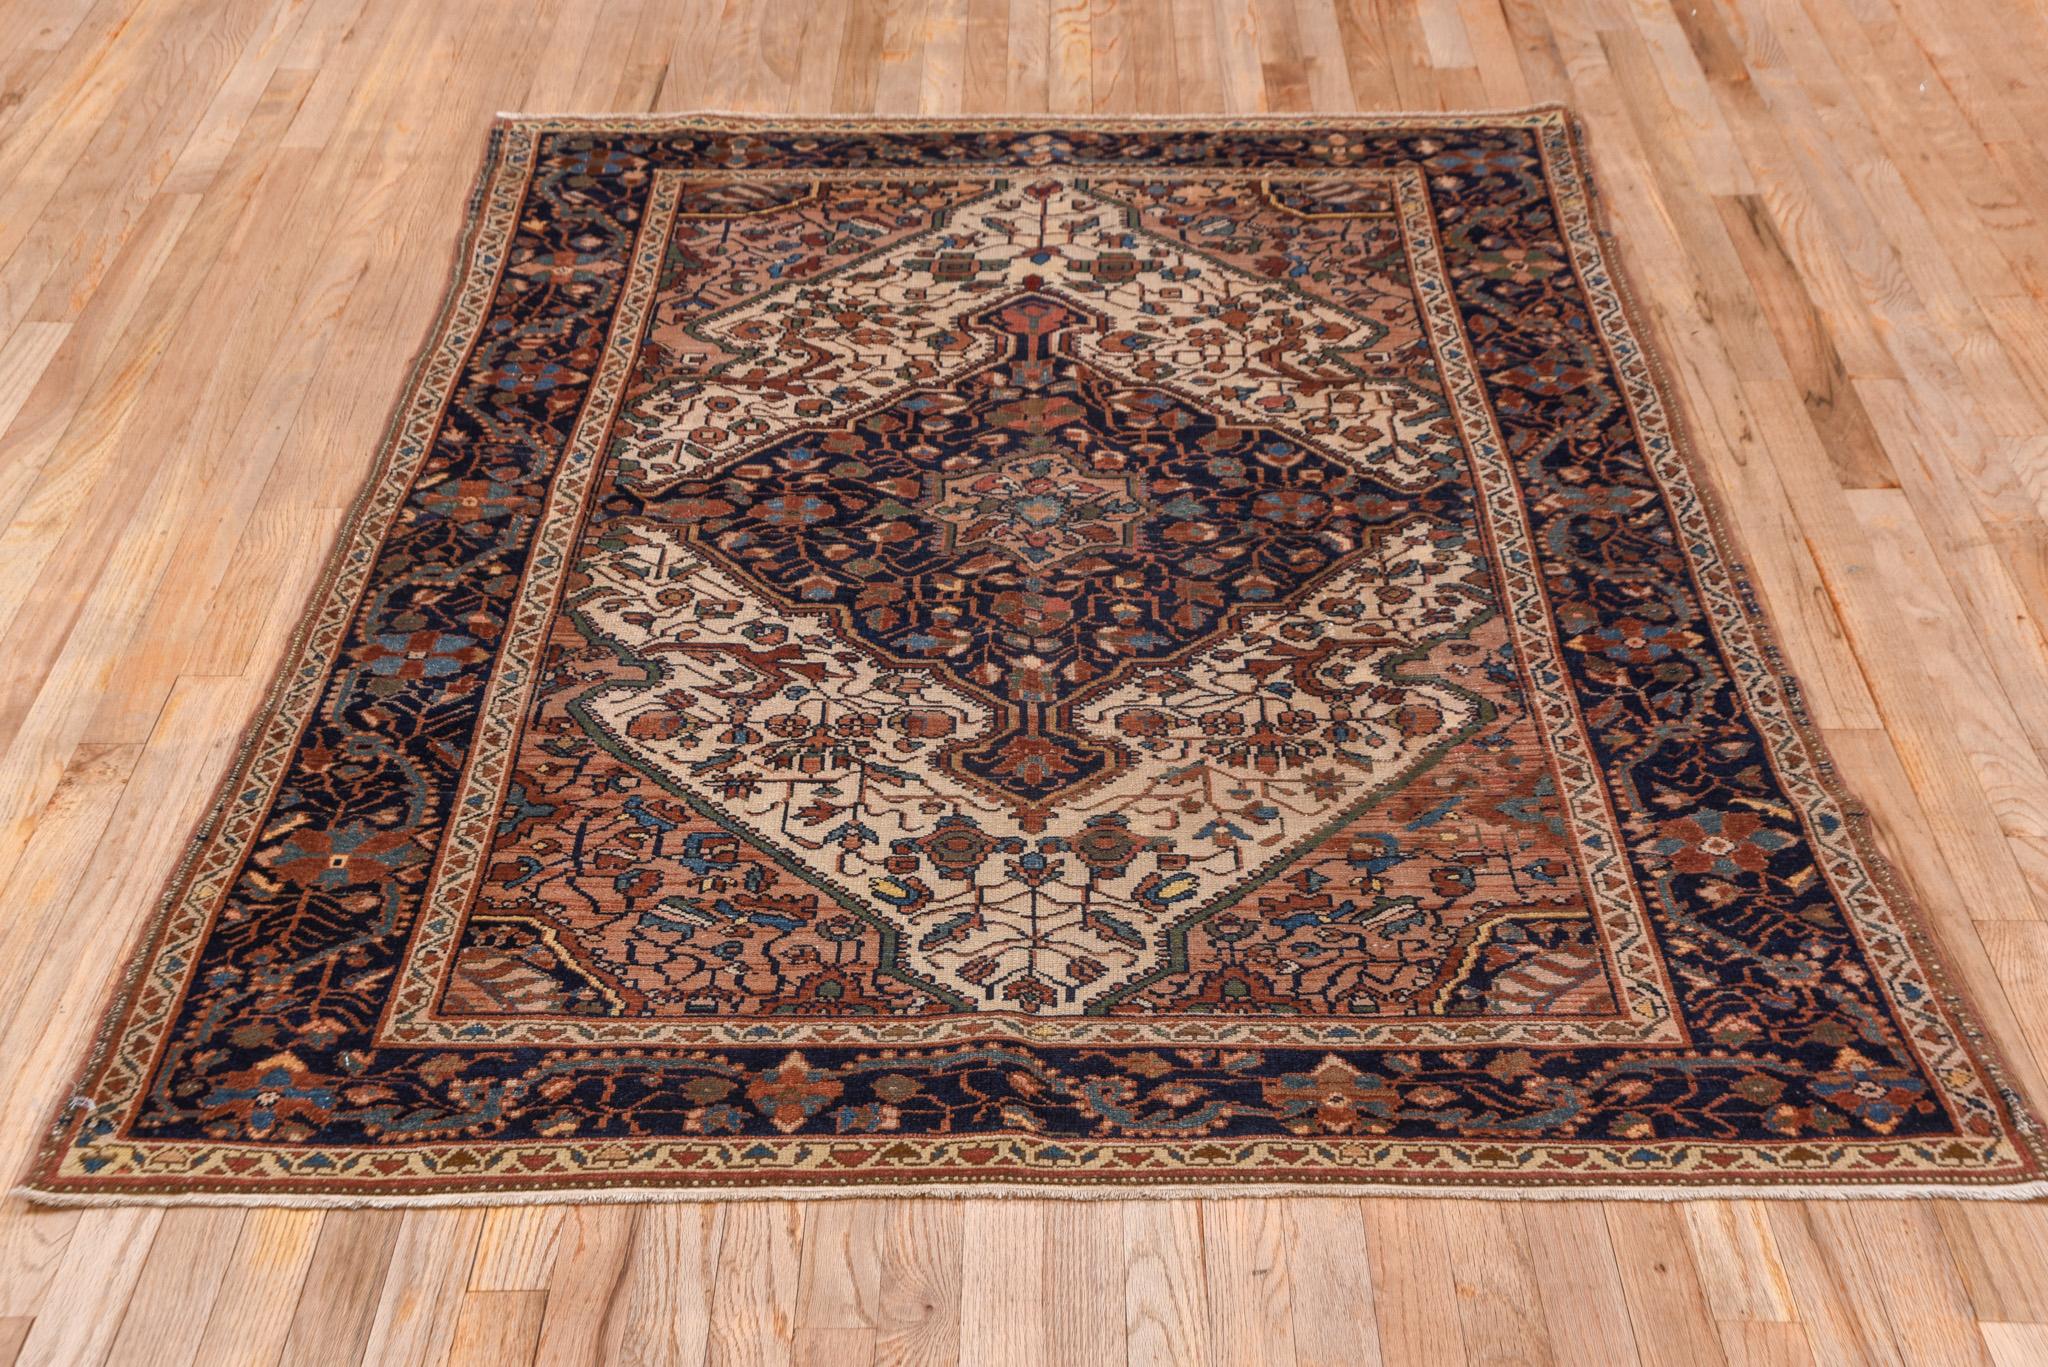 A Malayer Rug circa 1920. Hand-Knotted with 100% wool yarn. 